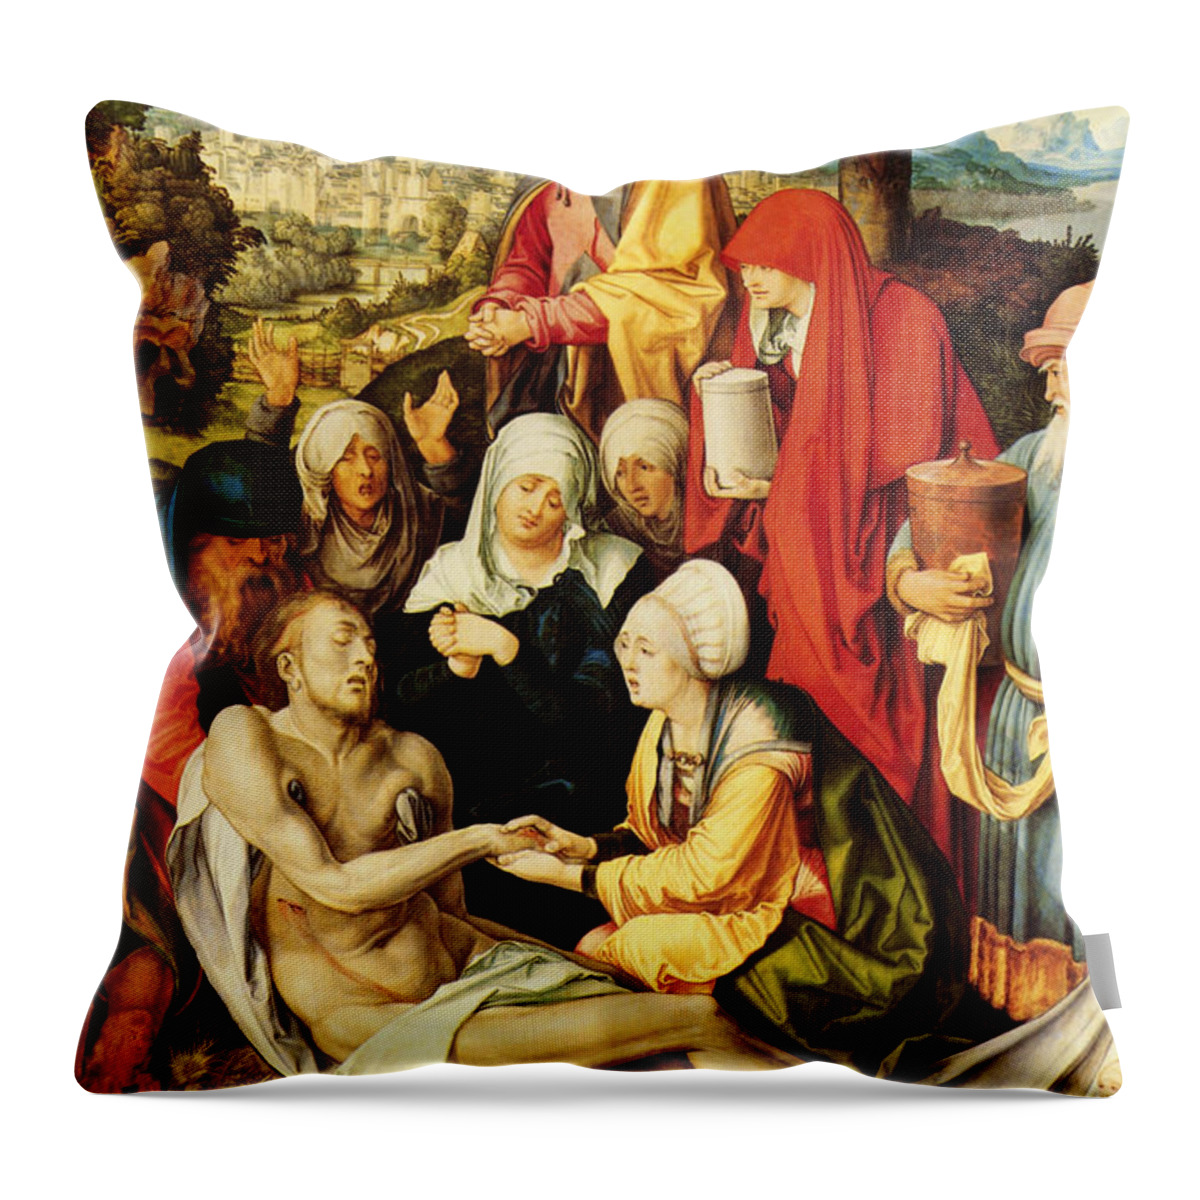 Christ Throw Pillow featuring the painting Weeping for Christ by Albrecht Durer